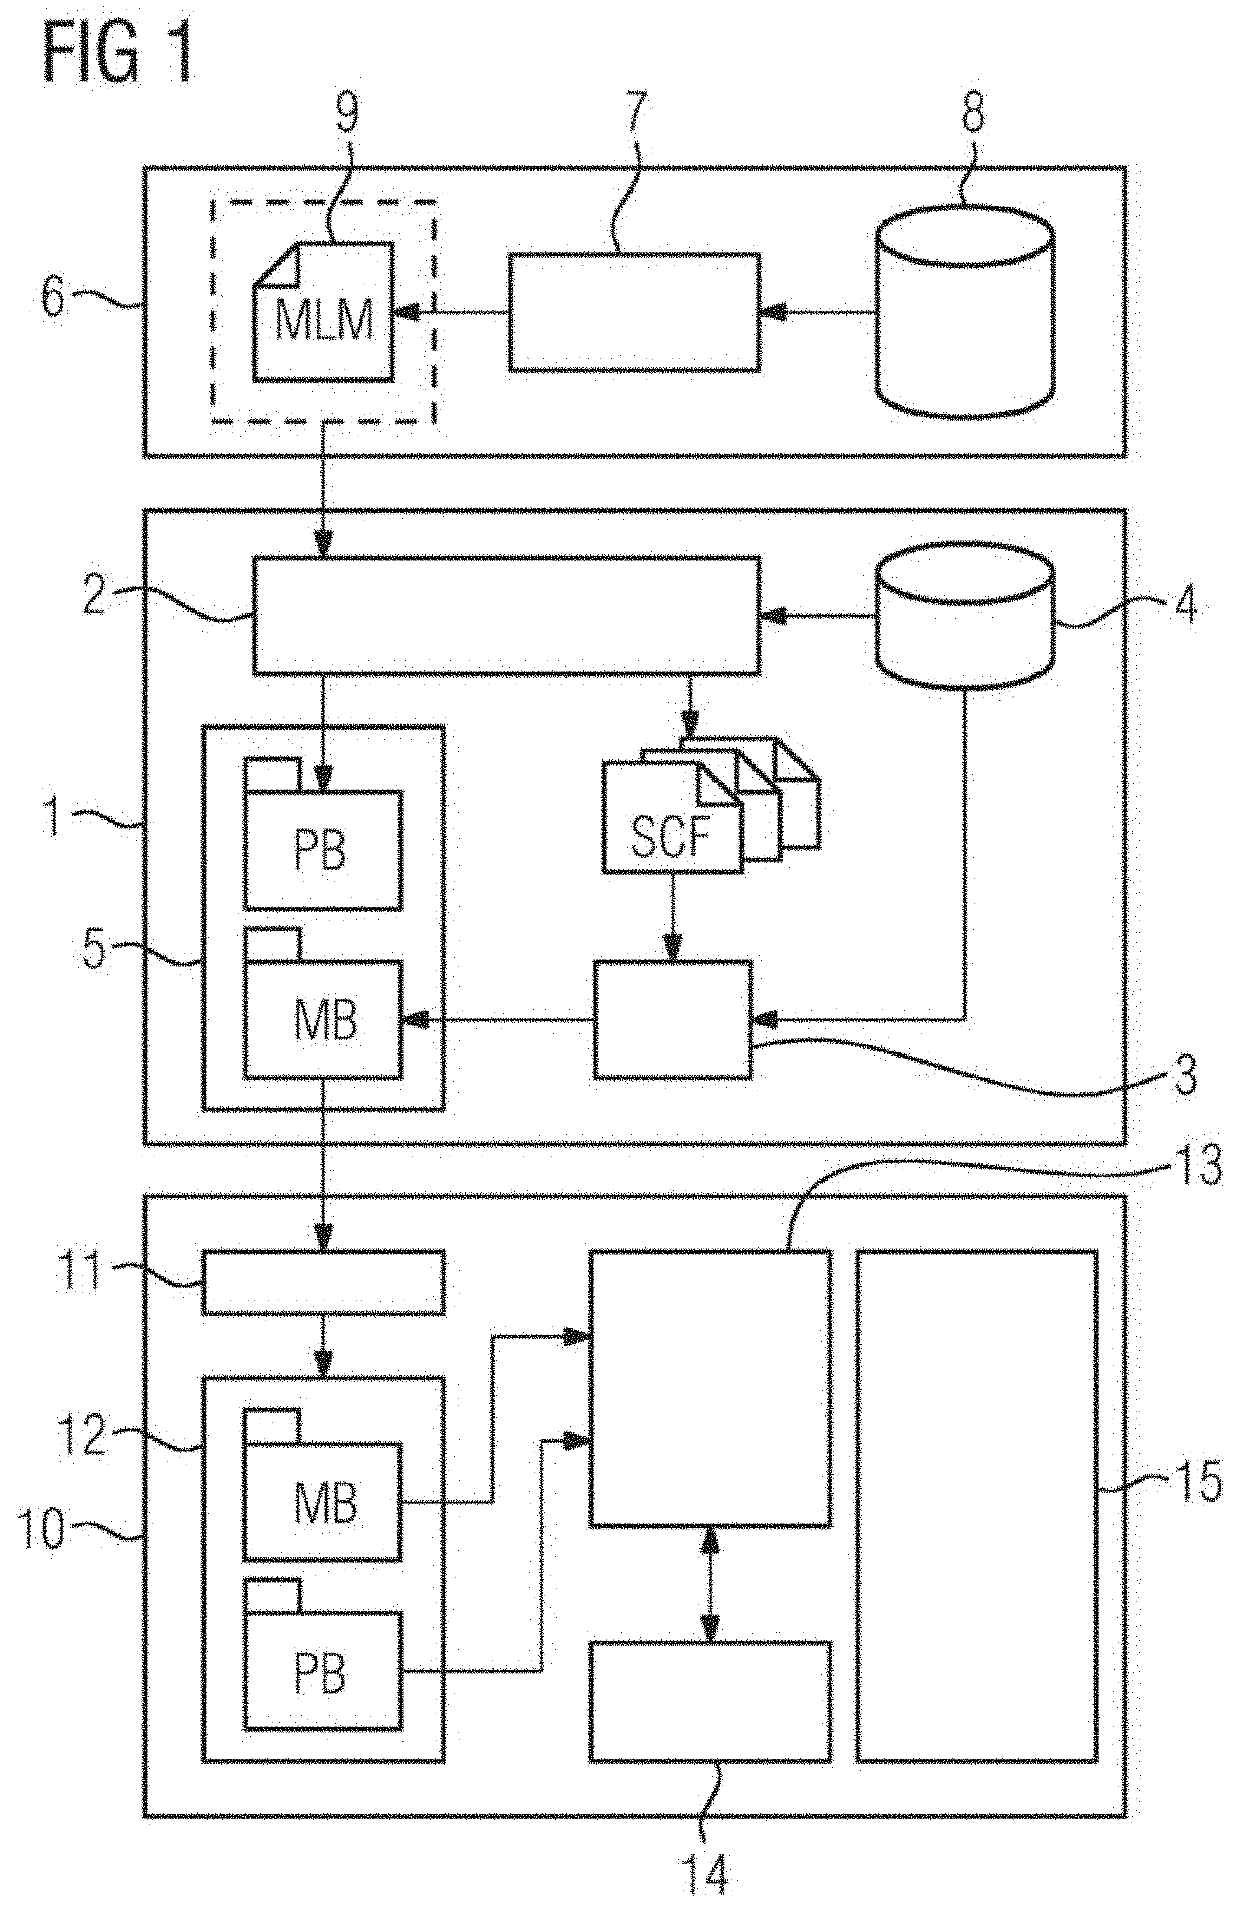 A method for development and execution of a machine learning model on a field device